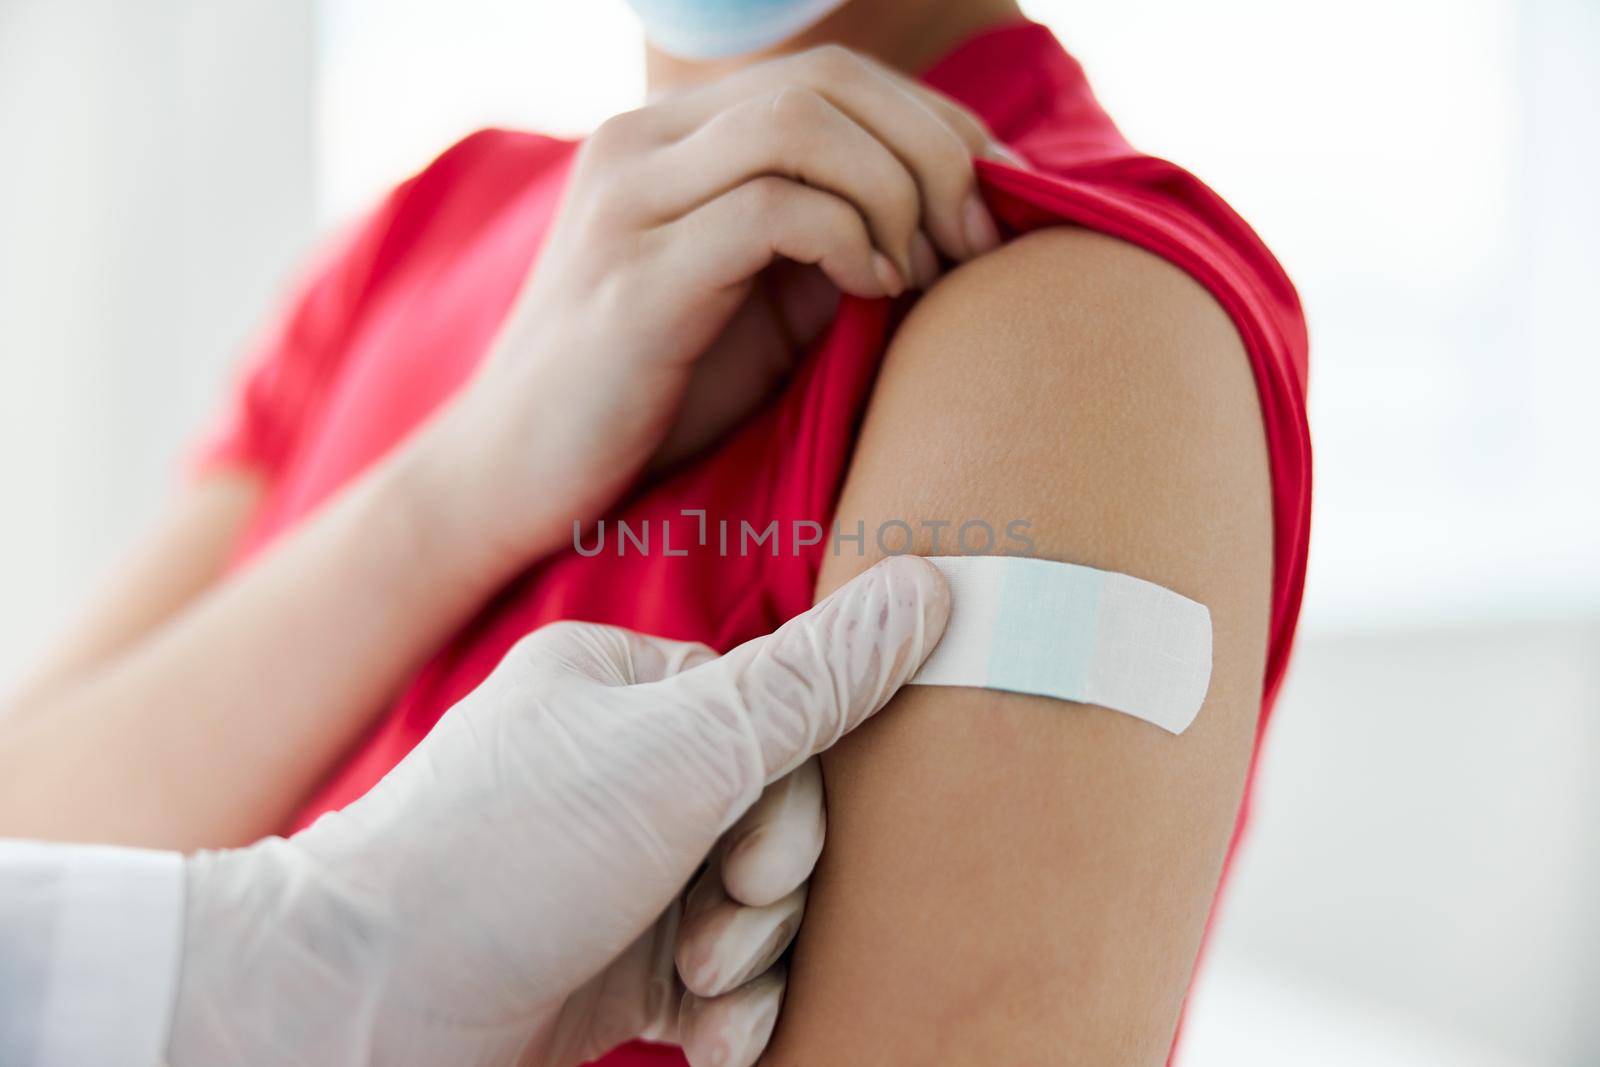 the doctor seals the hand with adhesive tape after the injection of health. High quality photo